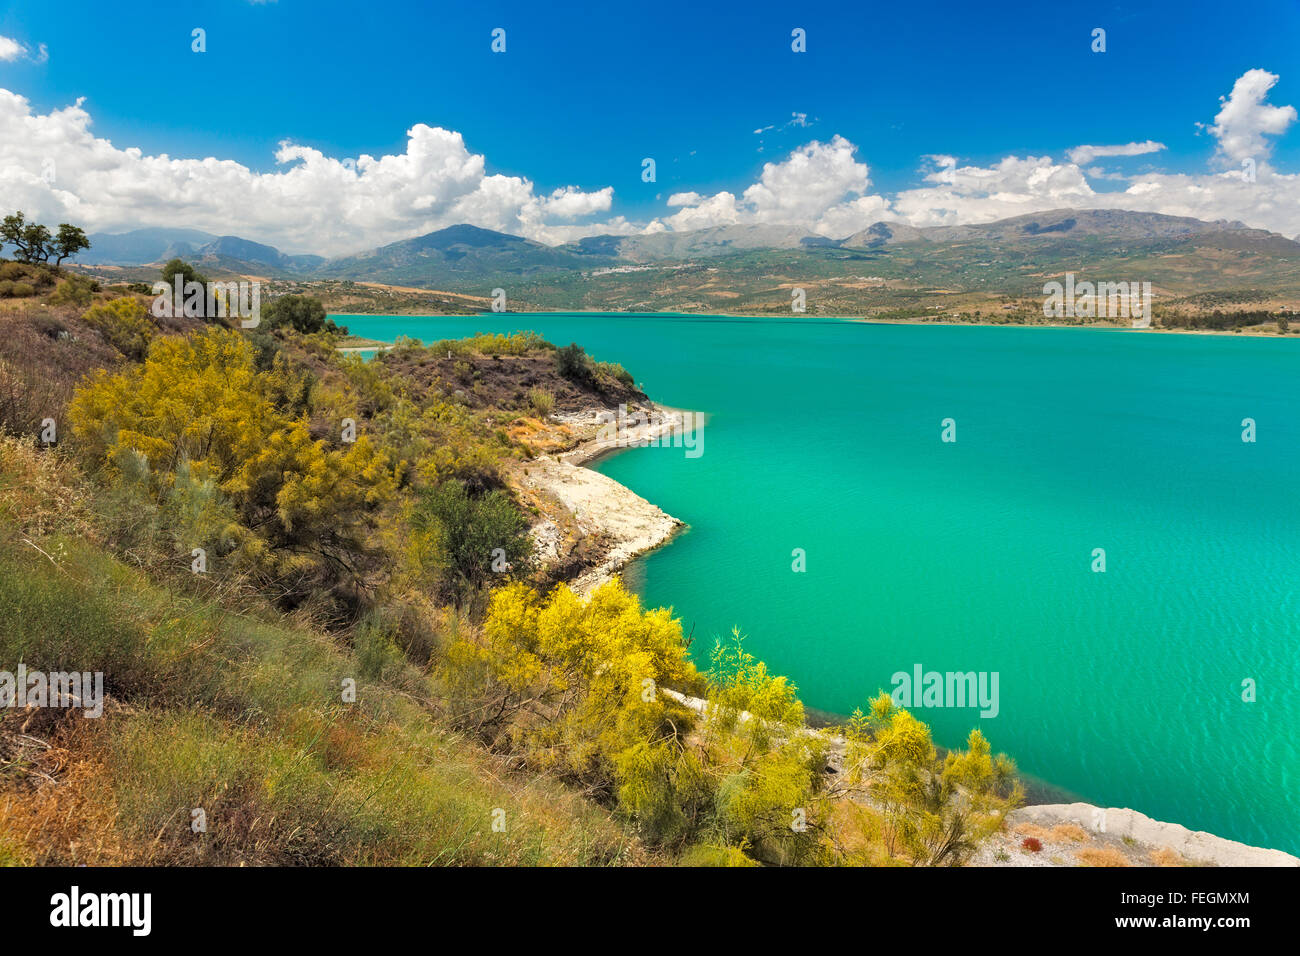 Lake Vinuela at a sunny day, Andalusia, Spain Stock Photo